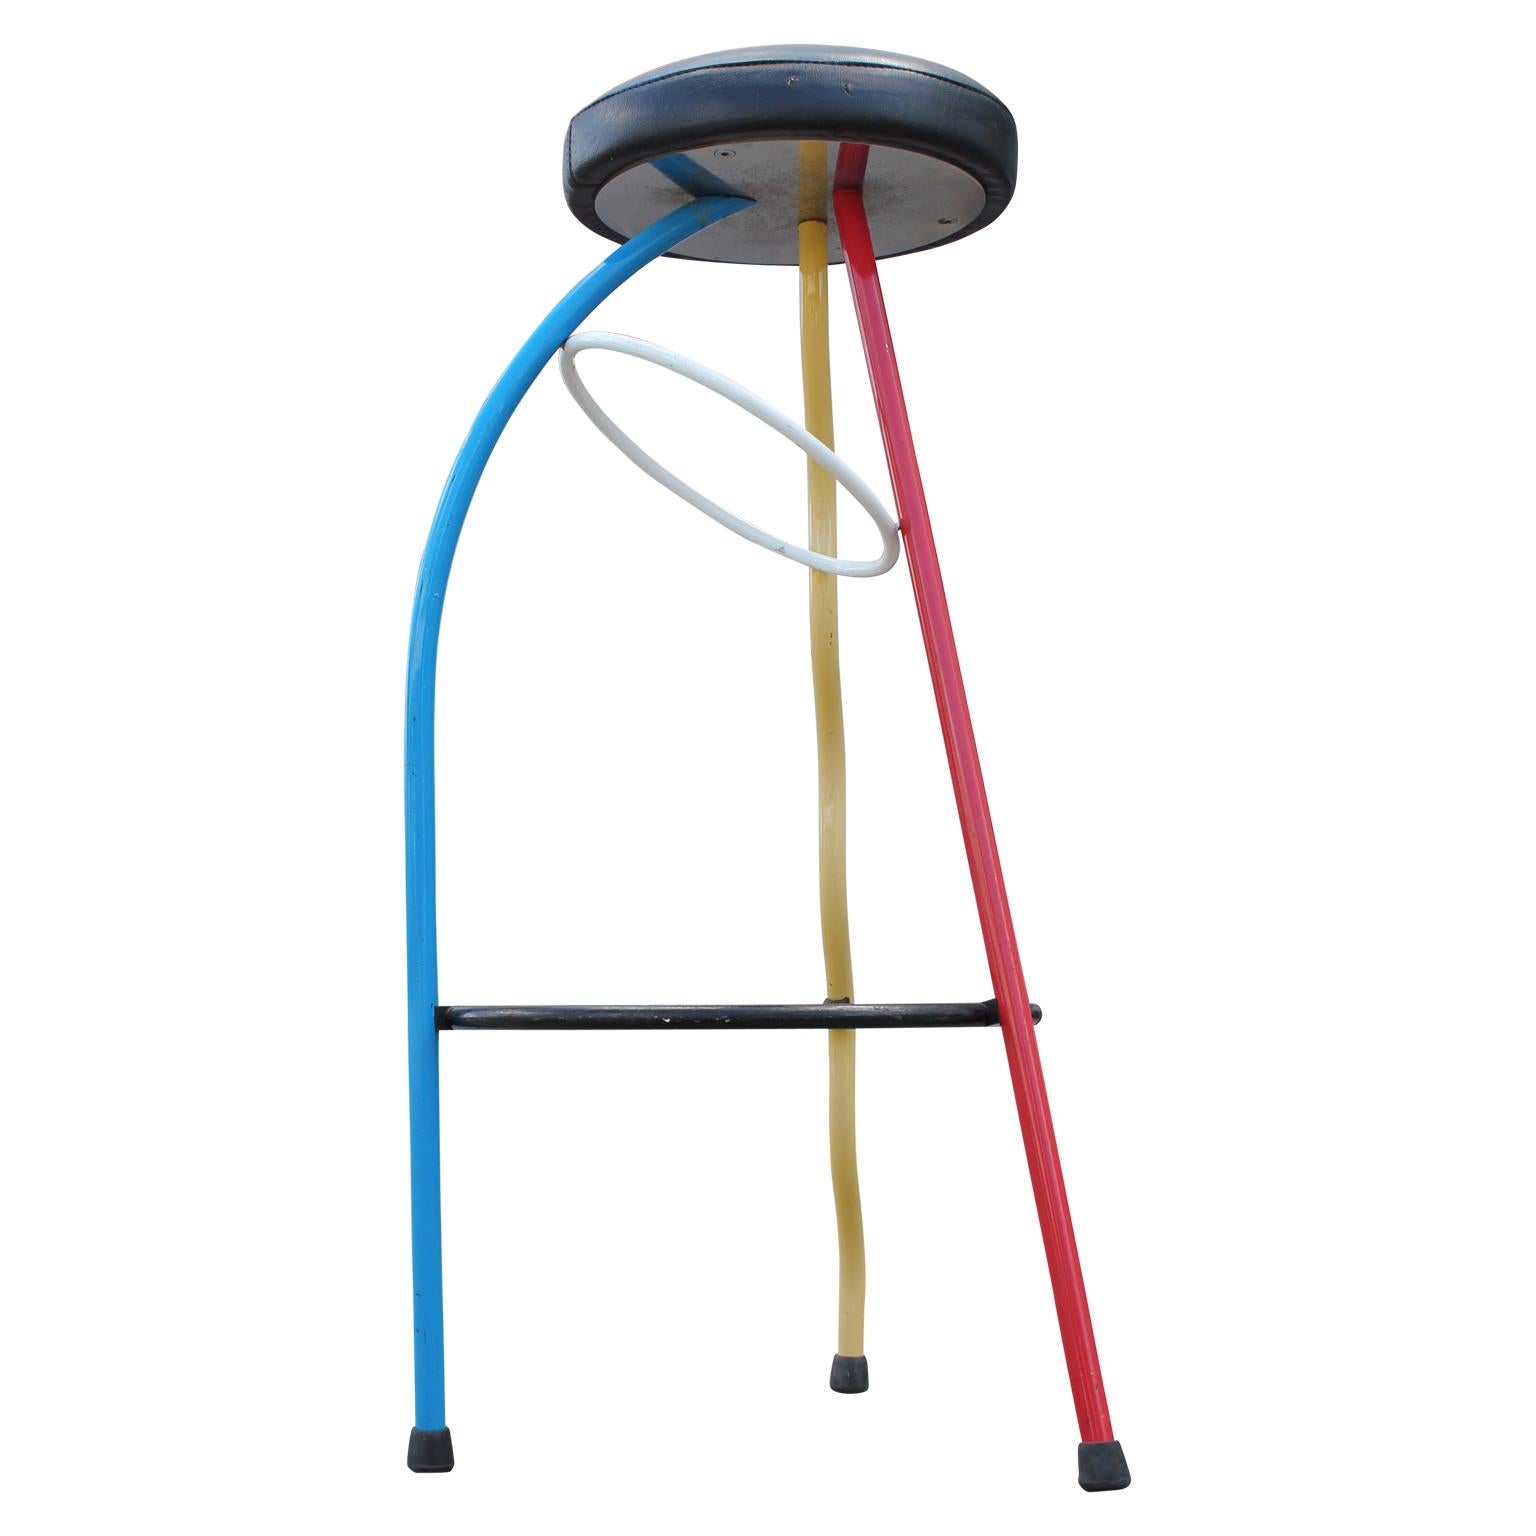 Quirky and fun pair of duplex bar stools by the famed Javier Mariscal. They have bright primary colored legs (red, yellow, blue) which contrast with the neutral accent colors (black, white).